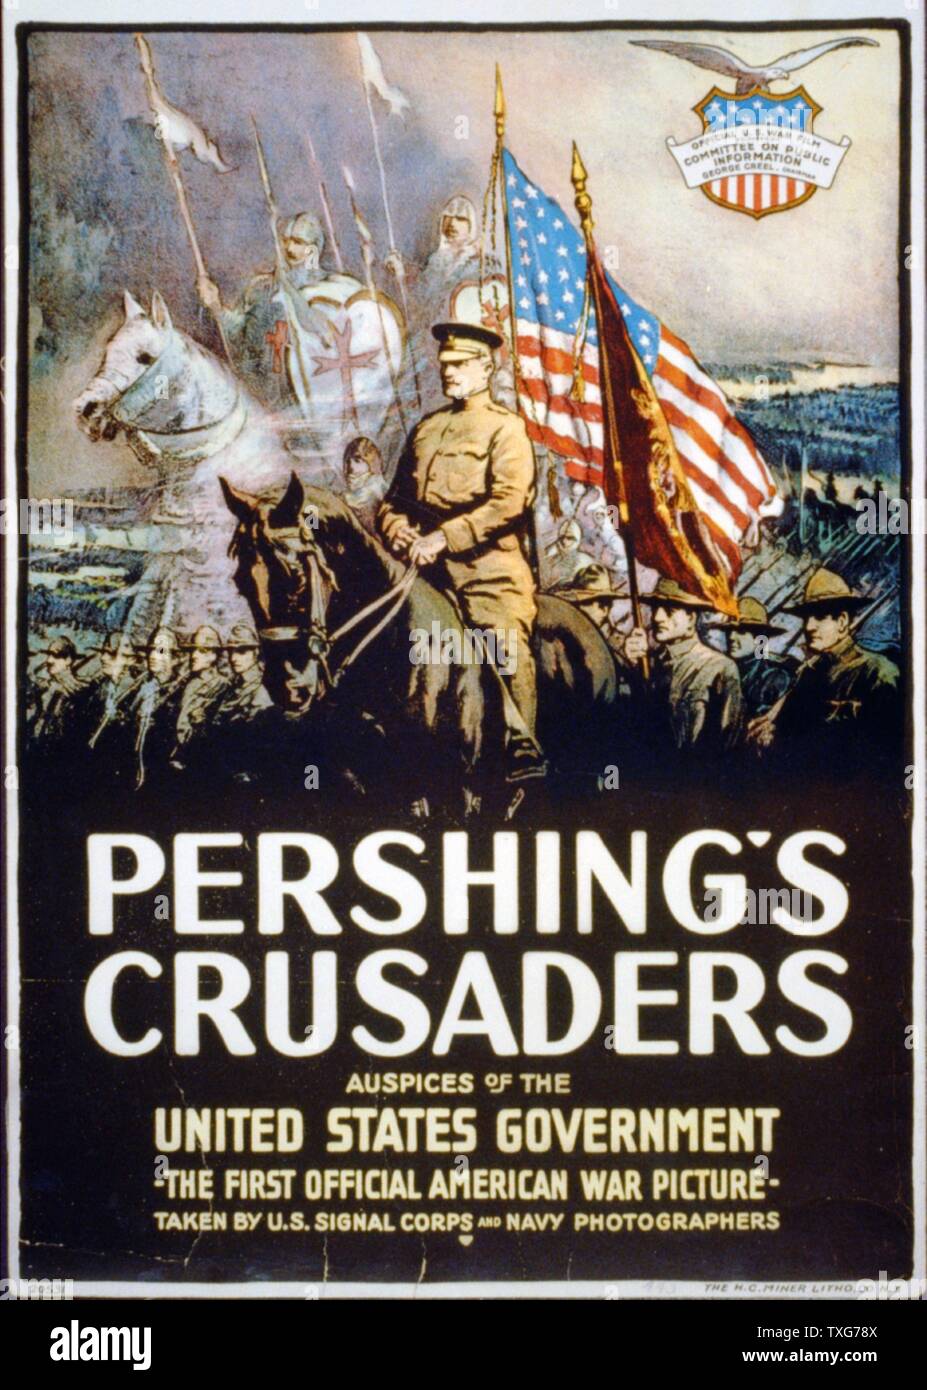 American World War I poster : Pershing's Crusaders General John Pershing, mounted on black horse, leading US forces into the war in Europe - Crusader knights float above the army Chromolithograph Stock Photo